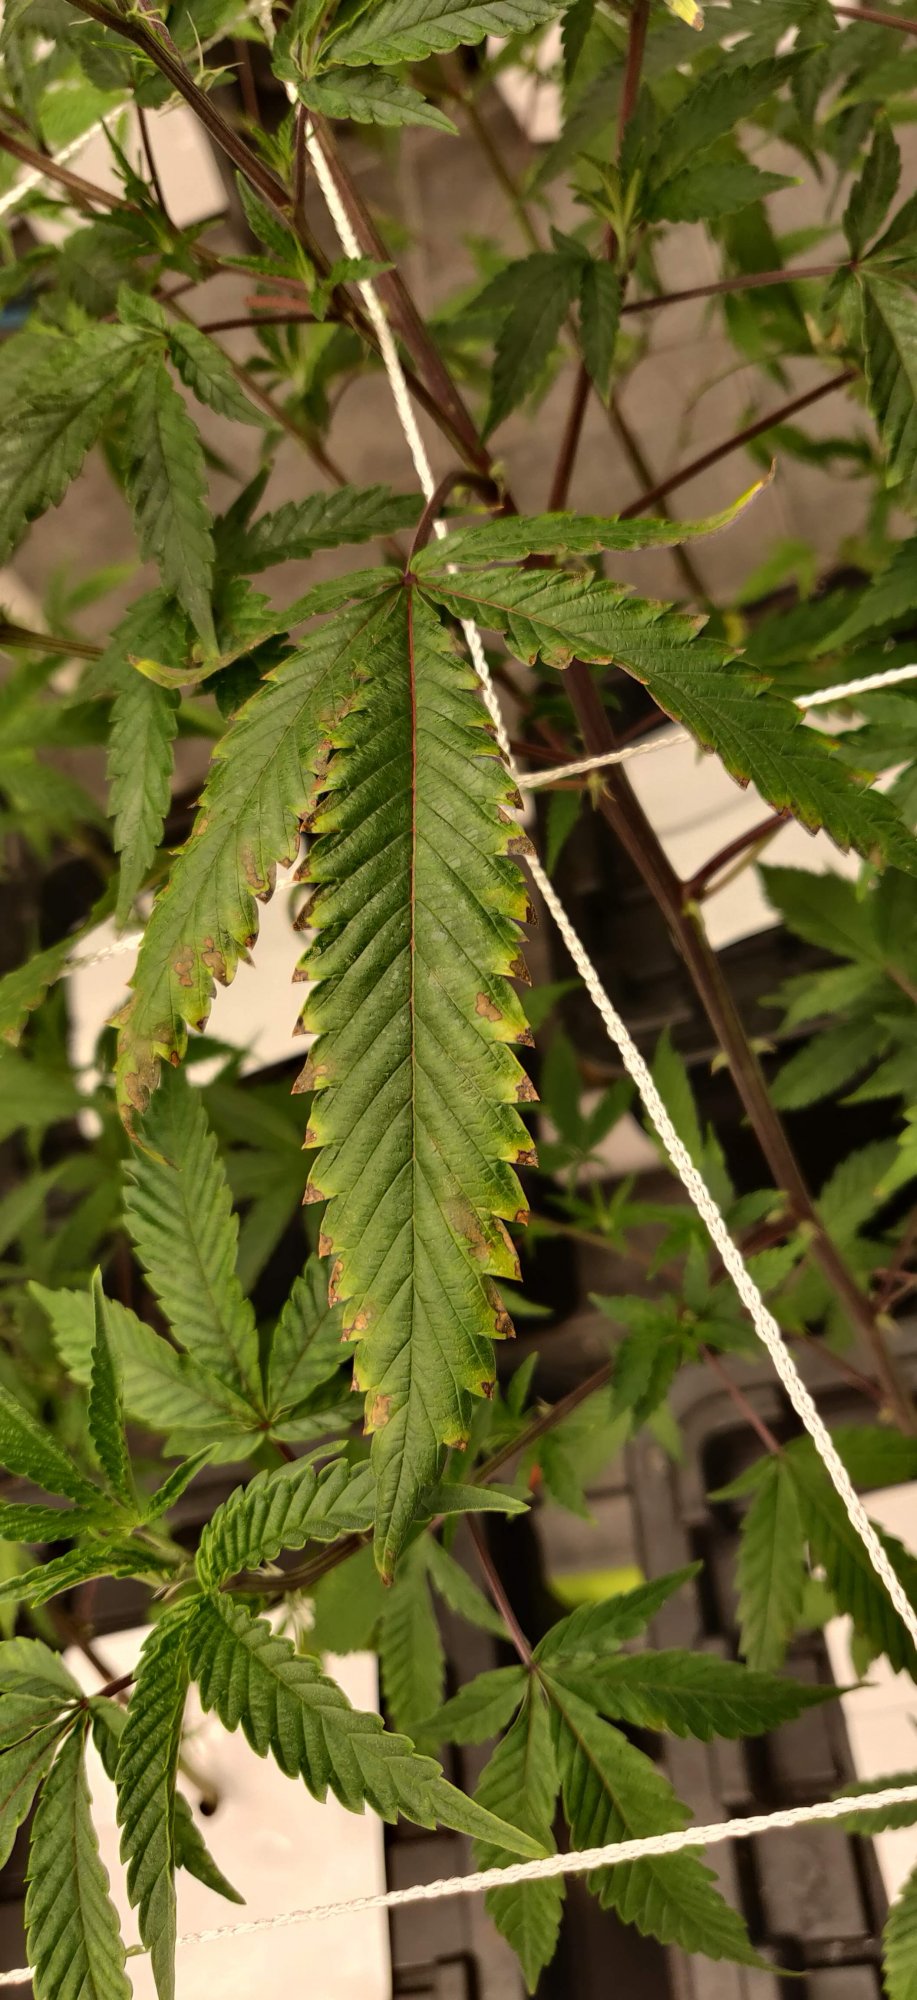 Help diagnose spots on leaves new grower 9